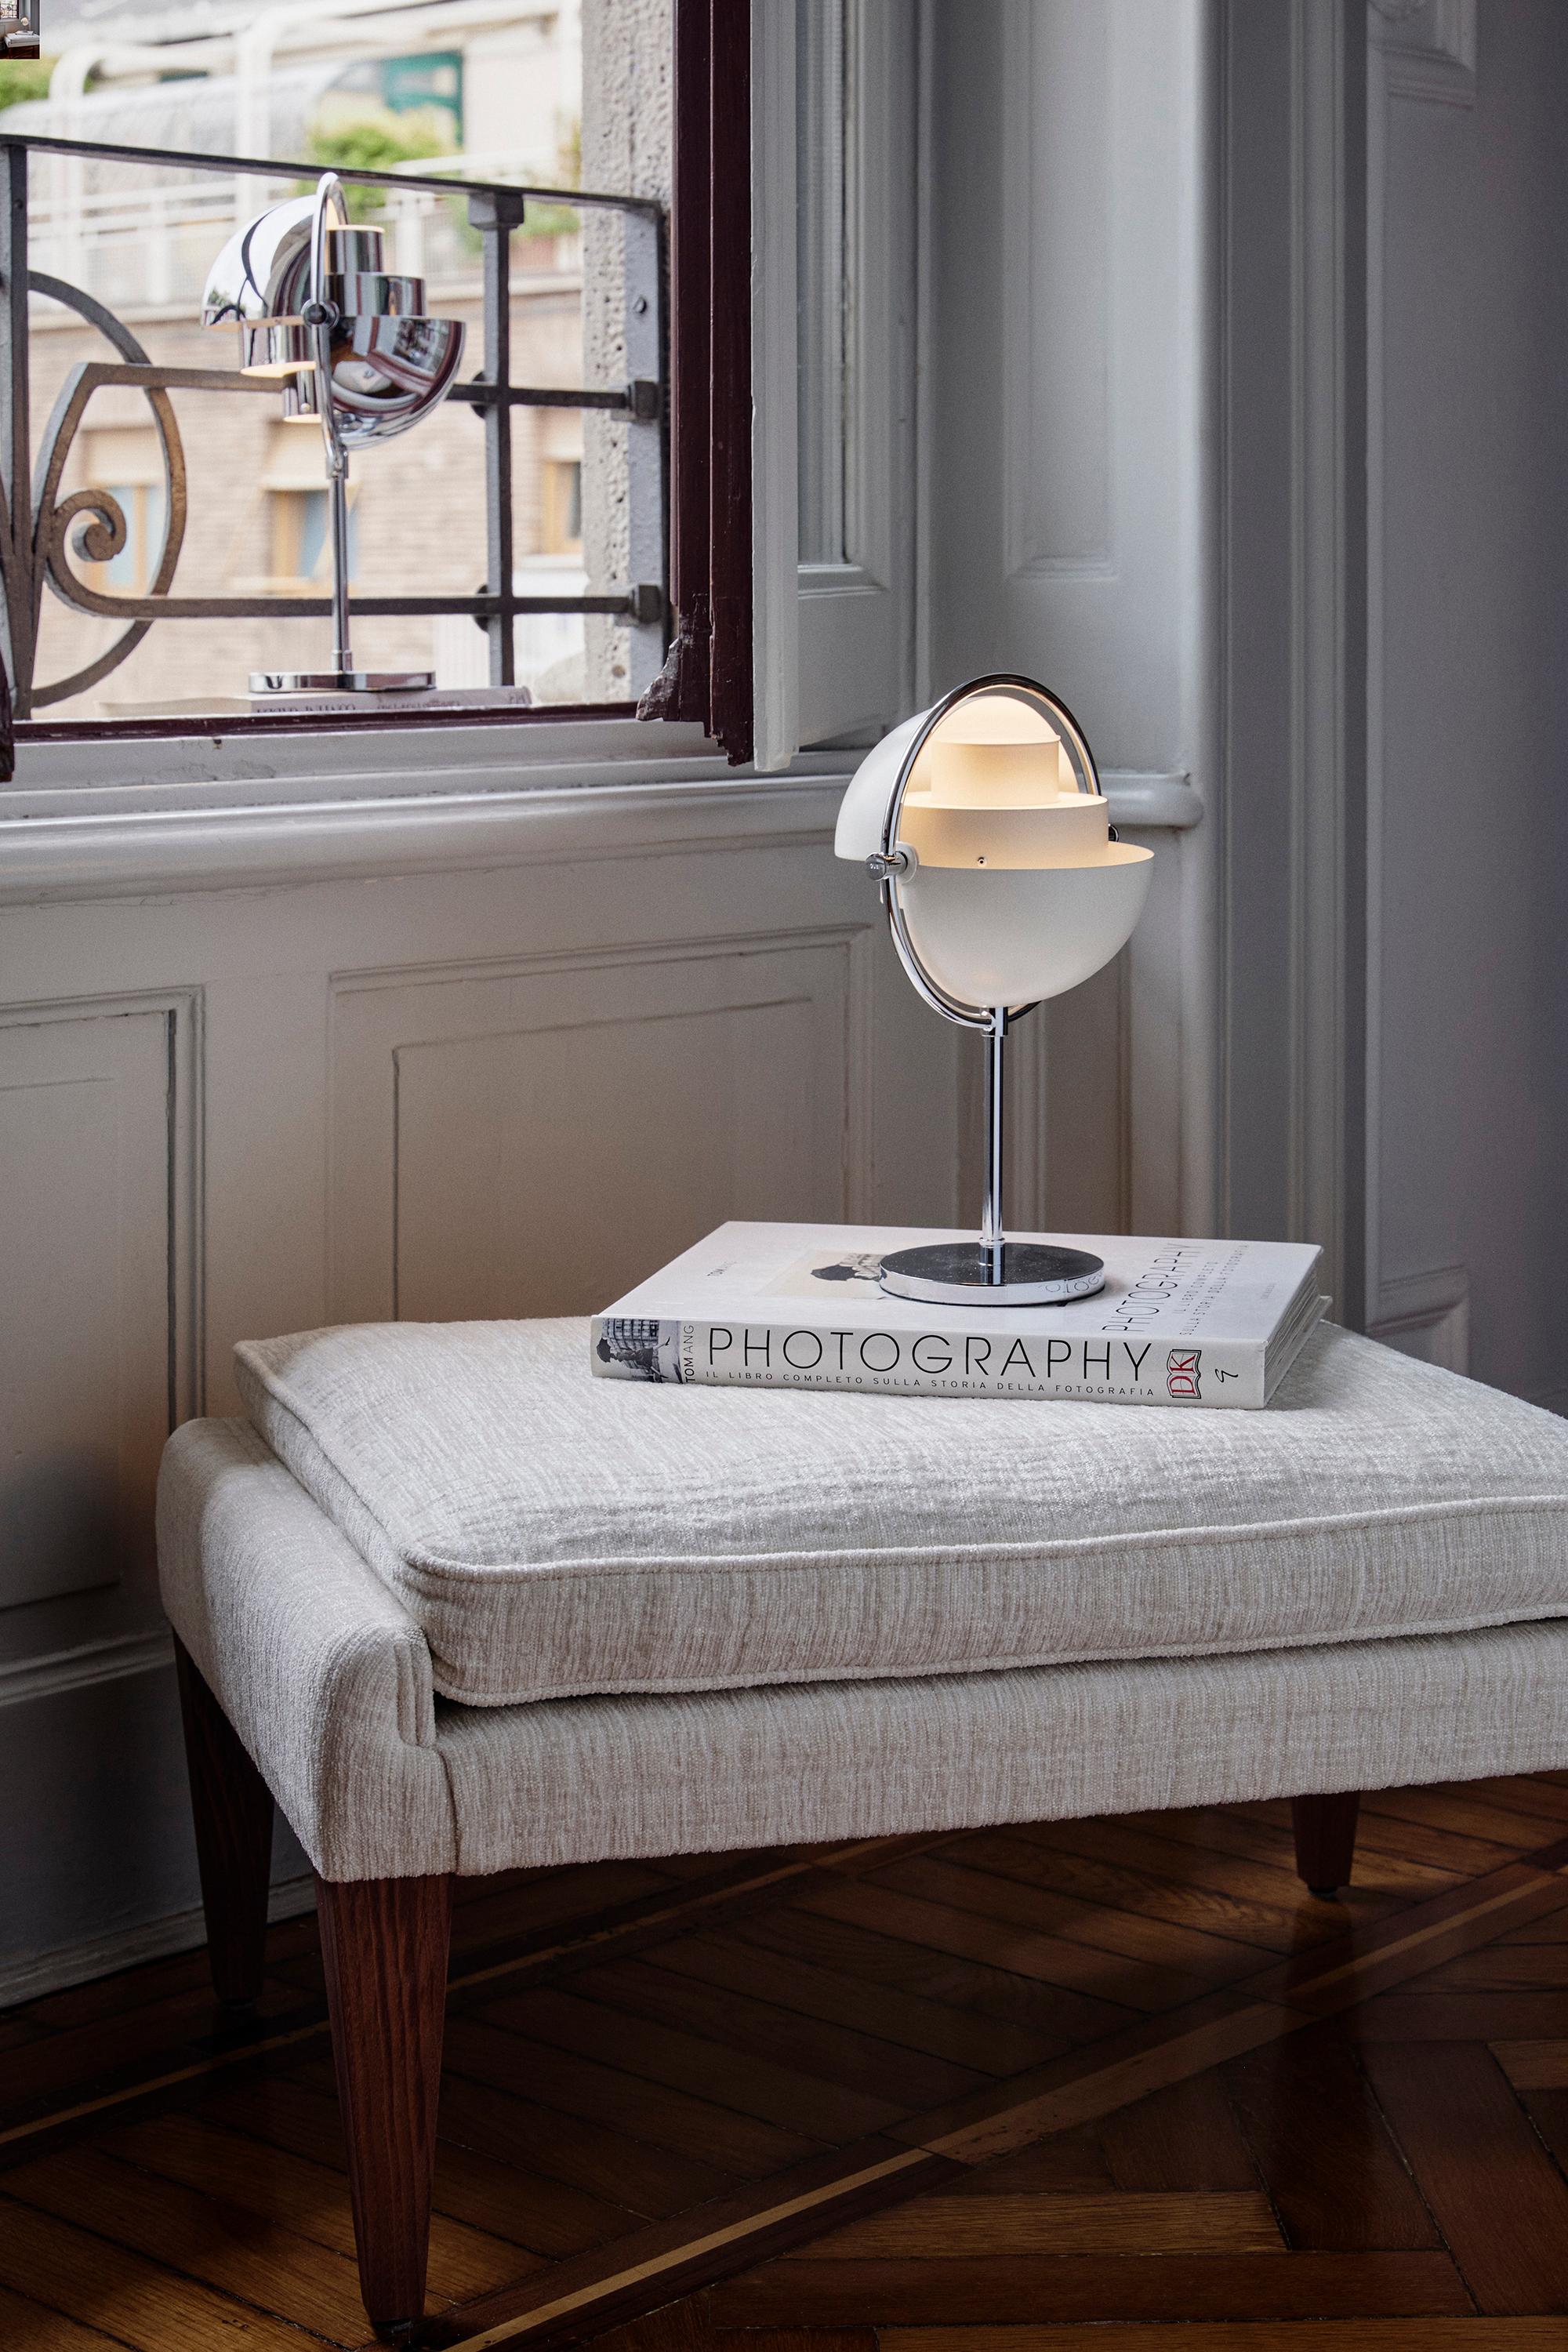 Louis Weisdorf 'Multi-Lite' Portable Table Lamp in White.

Designed in 1972 by Weisdorf, this new portable version of Weisdorf's iconic design was created by GUBI of Denmark, who meticulously reproduce his work with scrupulous attention to detail